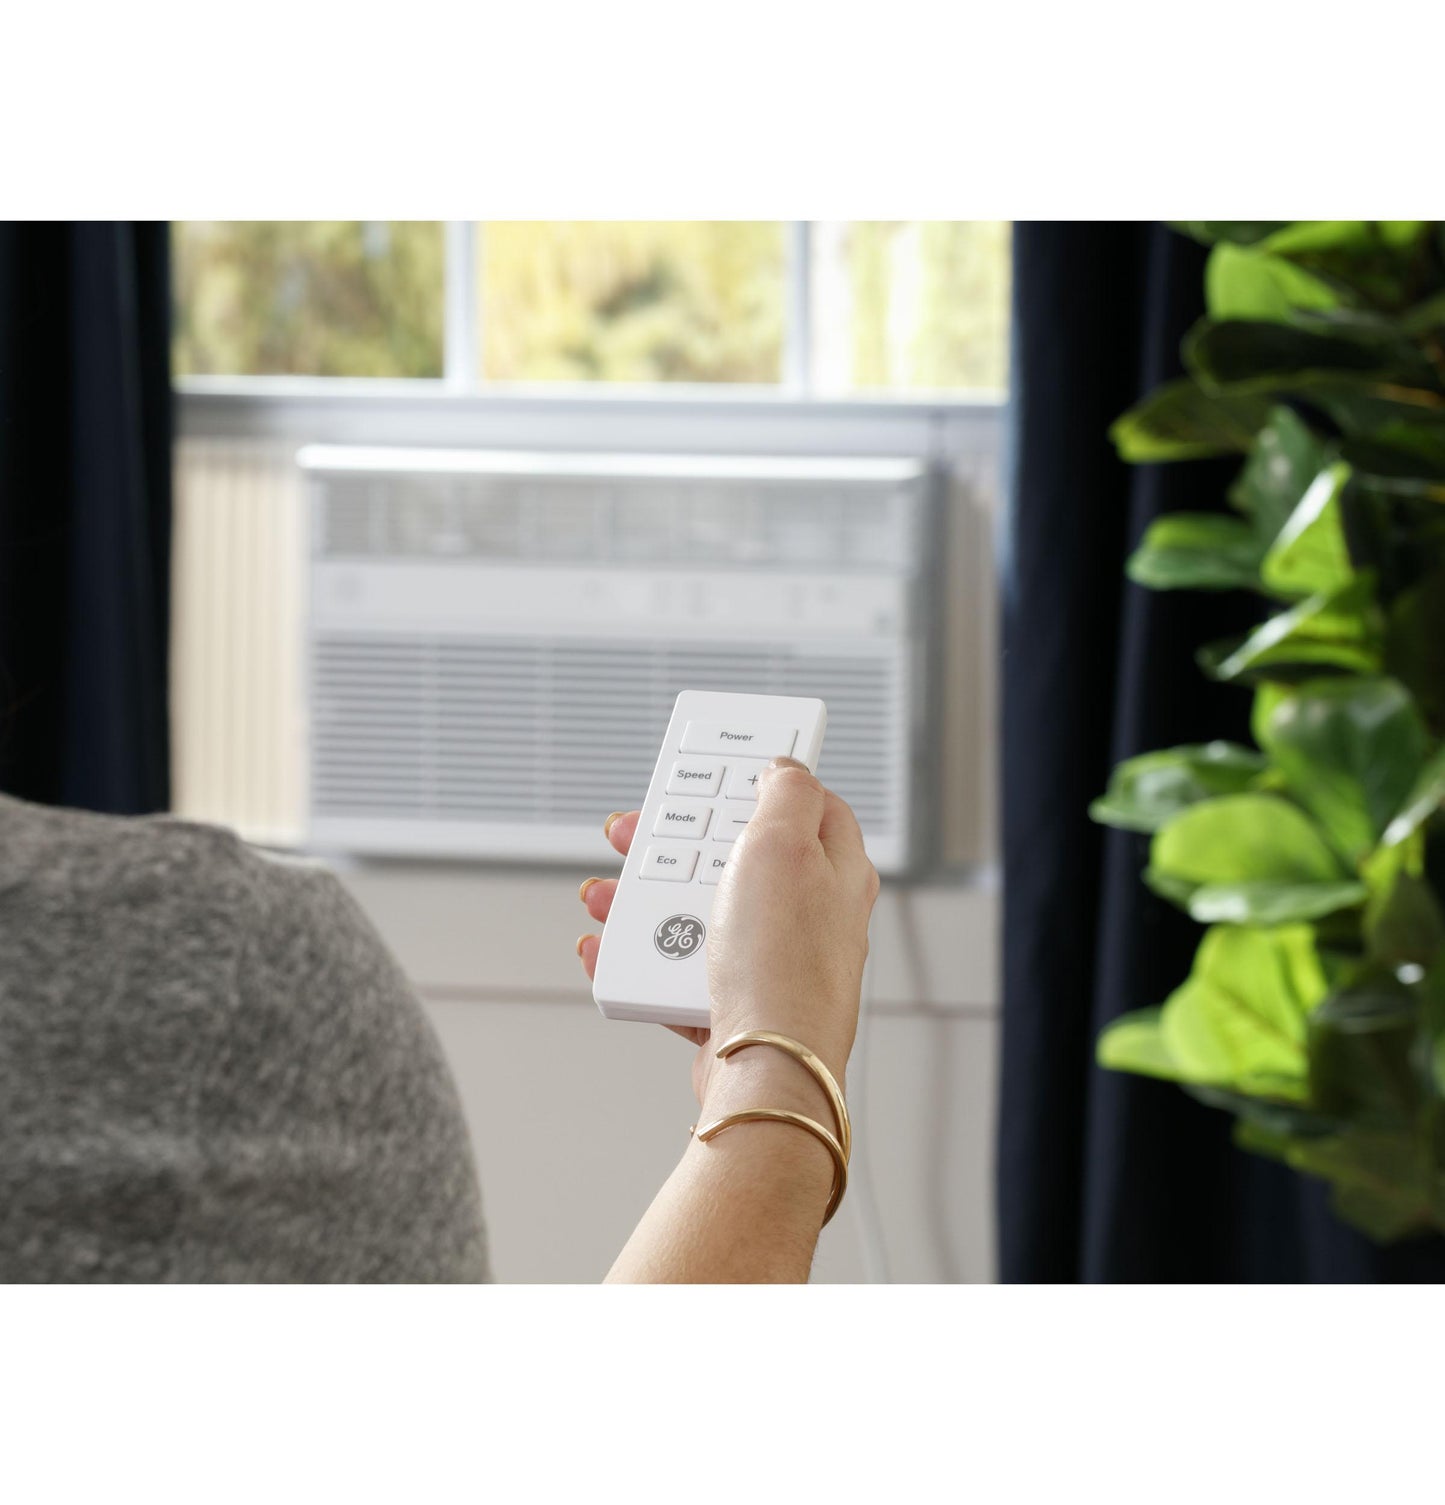 Ge Appliances AHE24DZ Ge® 23,500 Btu Heat/Cool Electronic Window Air Conditioner For Extra-Large Rooms Up To 1,500 Sq. Ft.